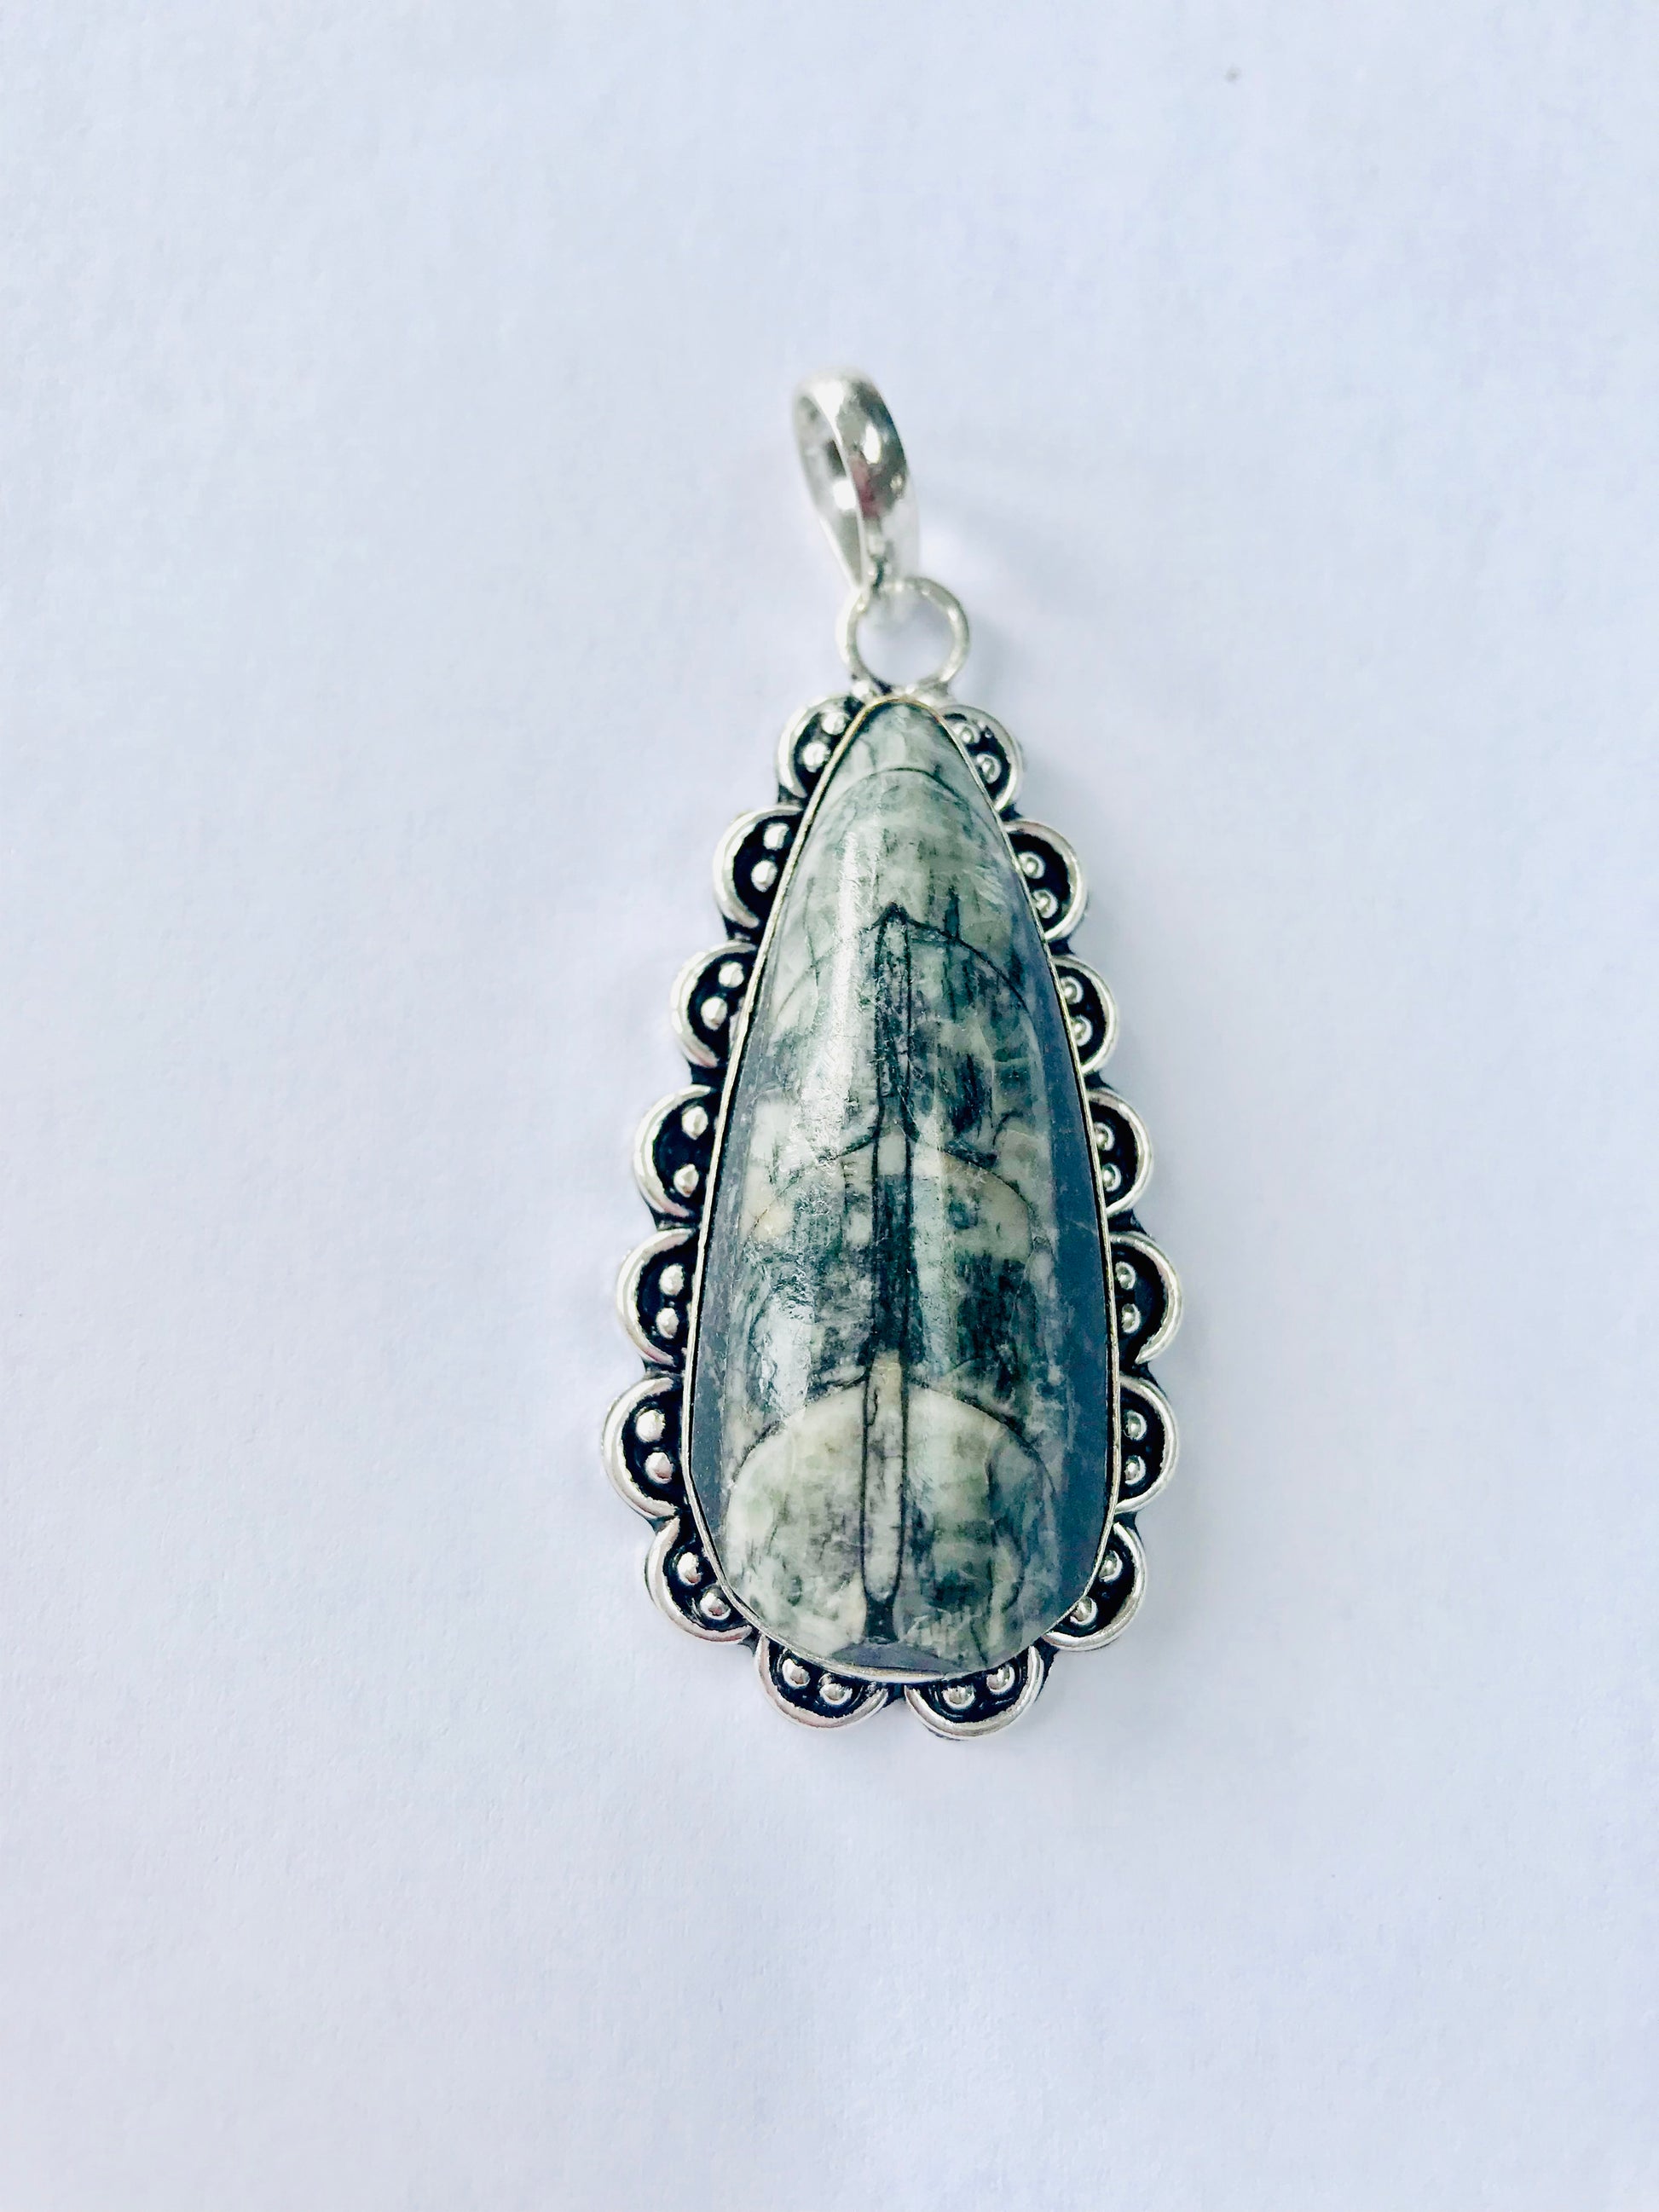 Orthoceras Fossil Pendant & 925 Silver Snake Chain - Reduces Toxins - Crystal Boutique.co.uk